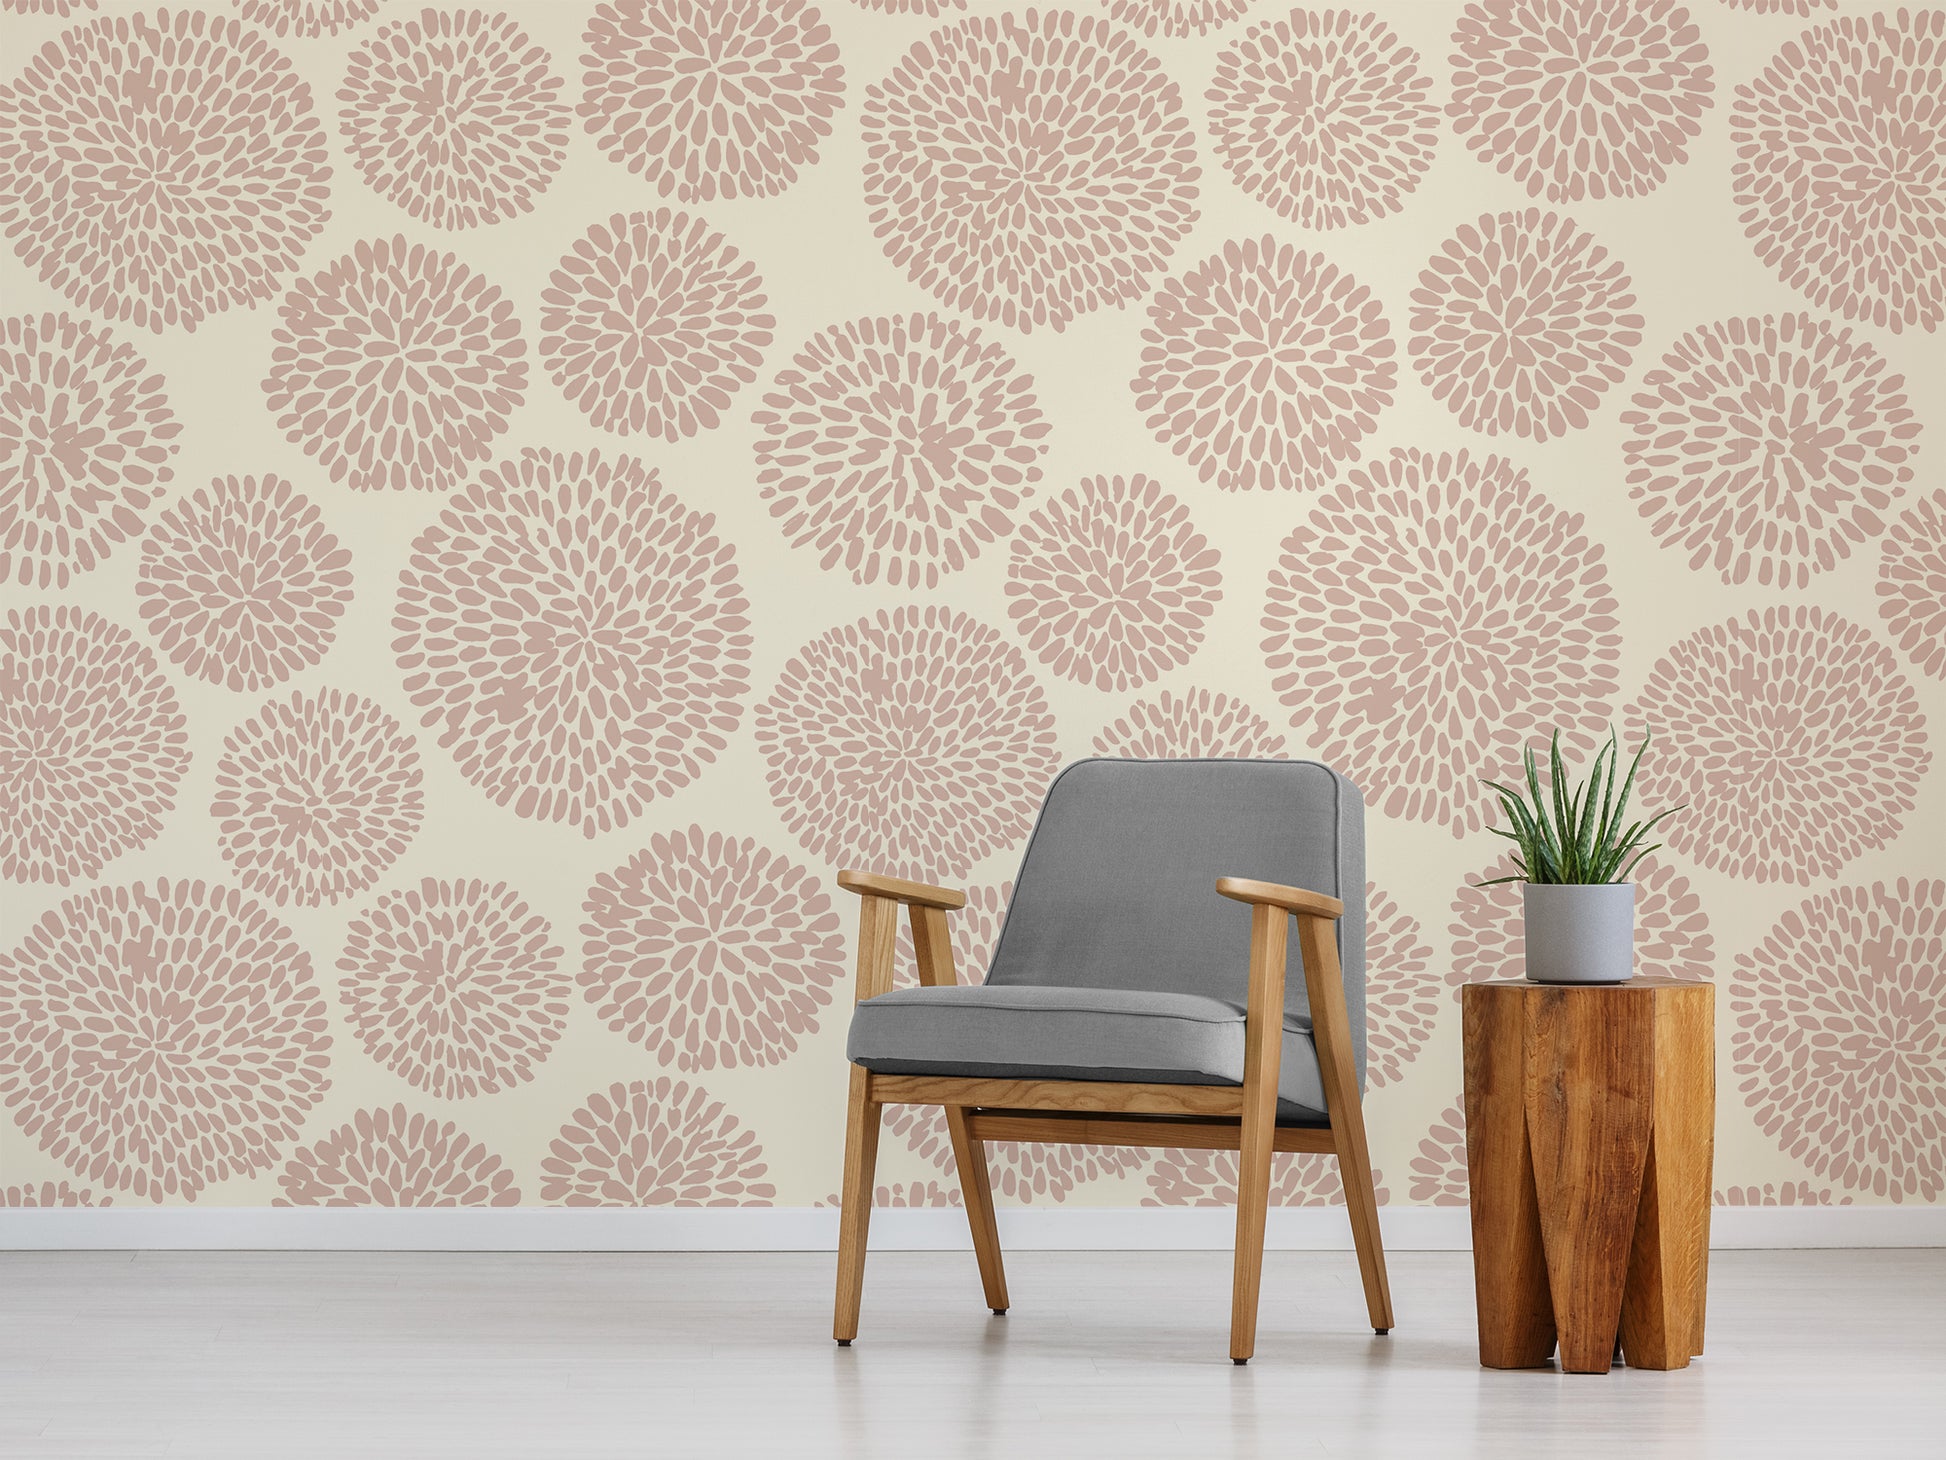 Auxence Taupe Neutral Circle Wallpaper with a Grey Occasional Chair